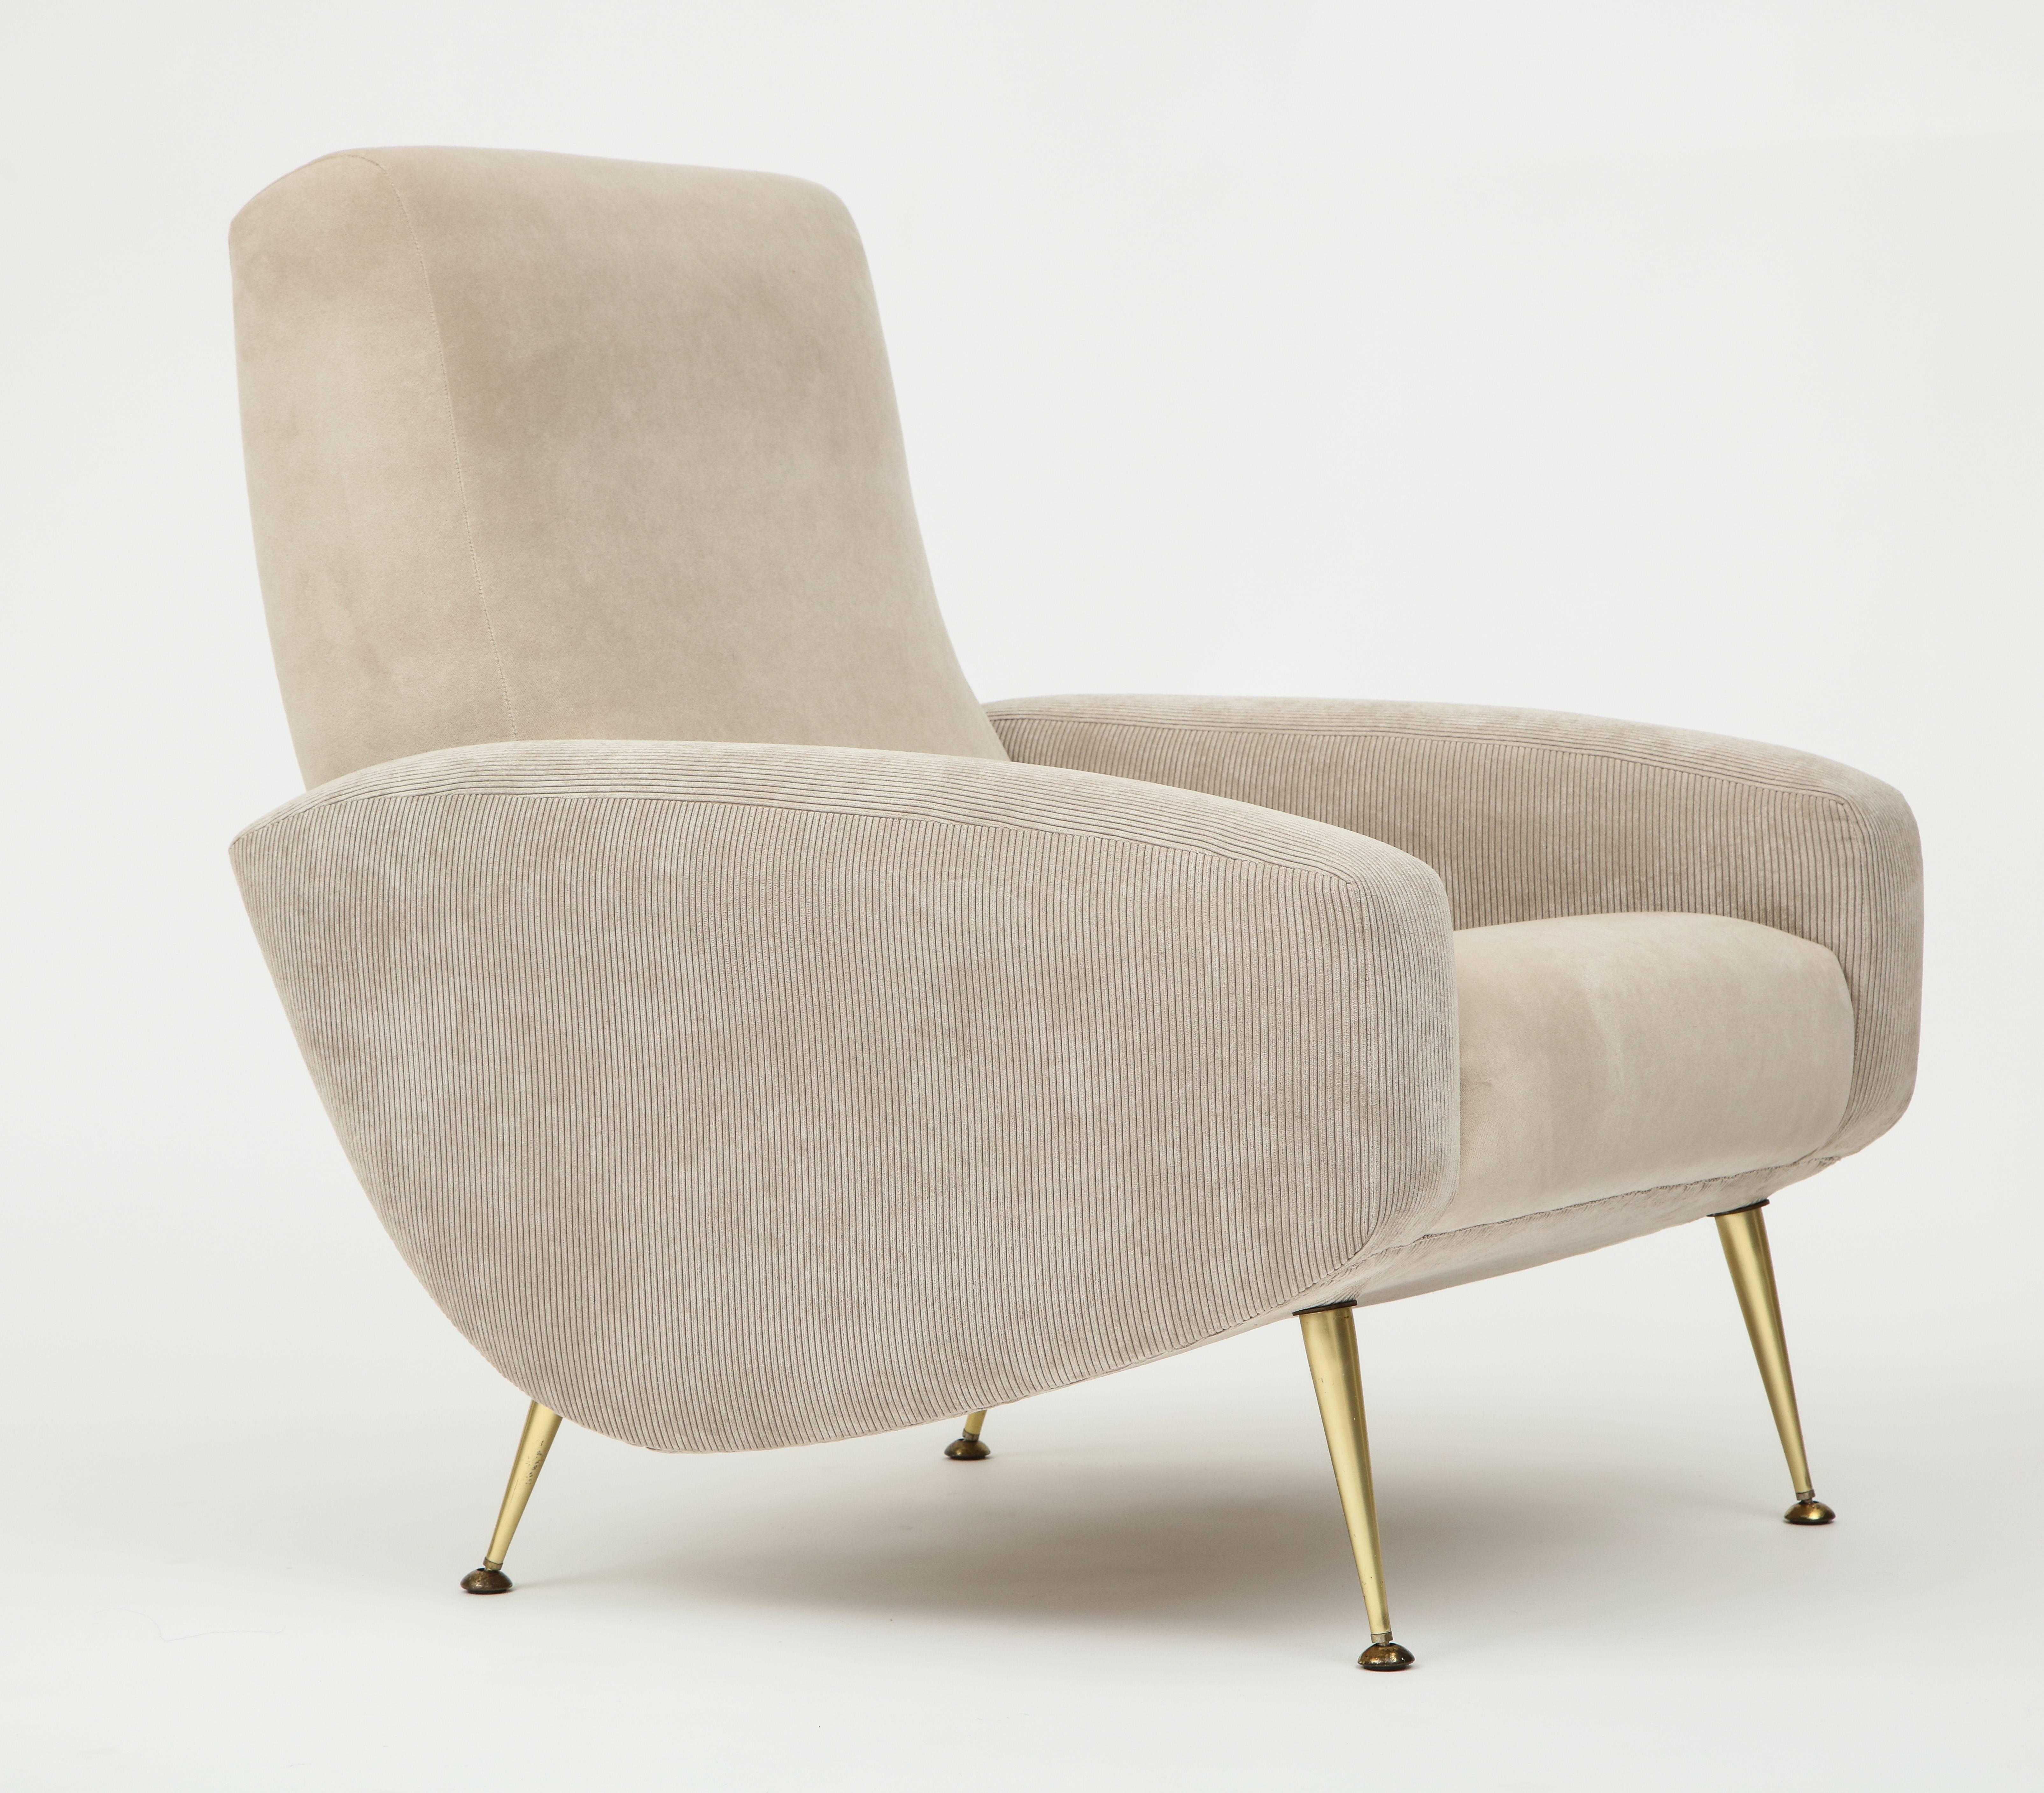 French midcentury corduroy velvet grey beige lounge chairs brass feet

Beautiful and very comfortable French midcentury lounge chairs. Beautiful Brass feet detail. Grey beige upholstery fabric.
Timeless and elegant pair of chairs that matches any